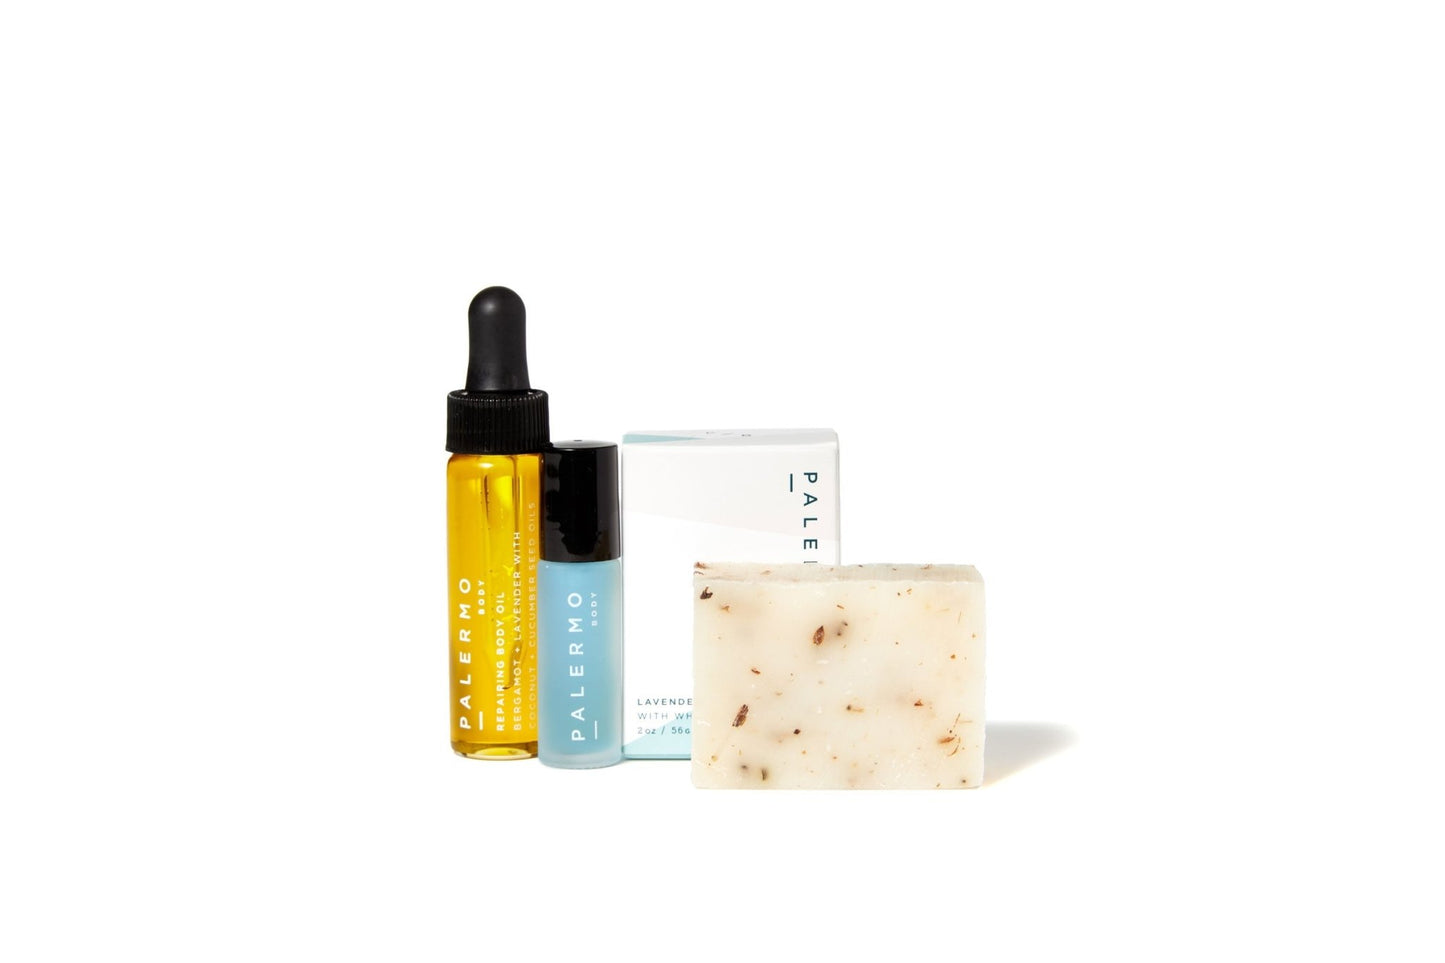 Repair + Relax Mindful Kit by Palermo Body Leaves of Leisure